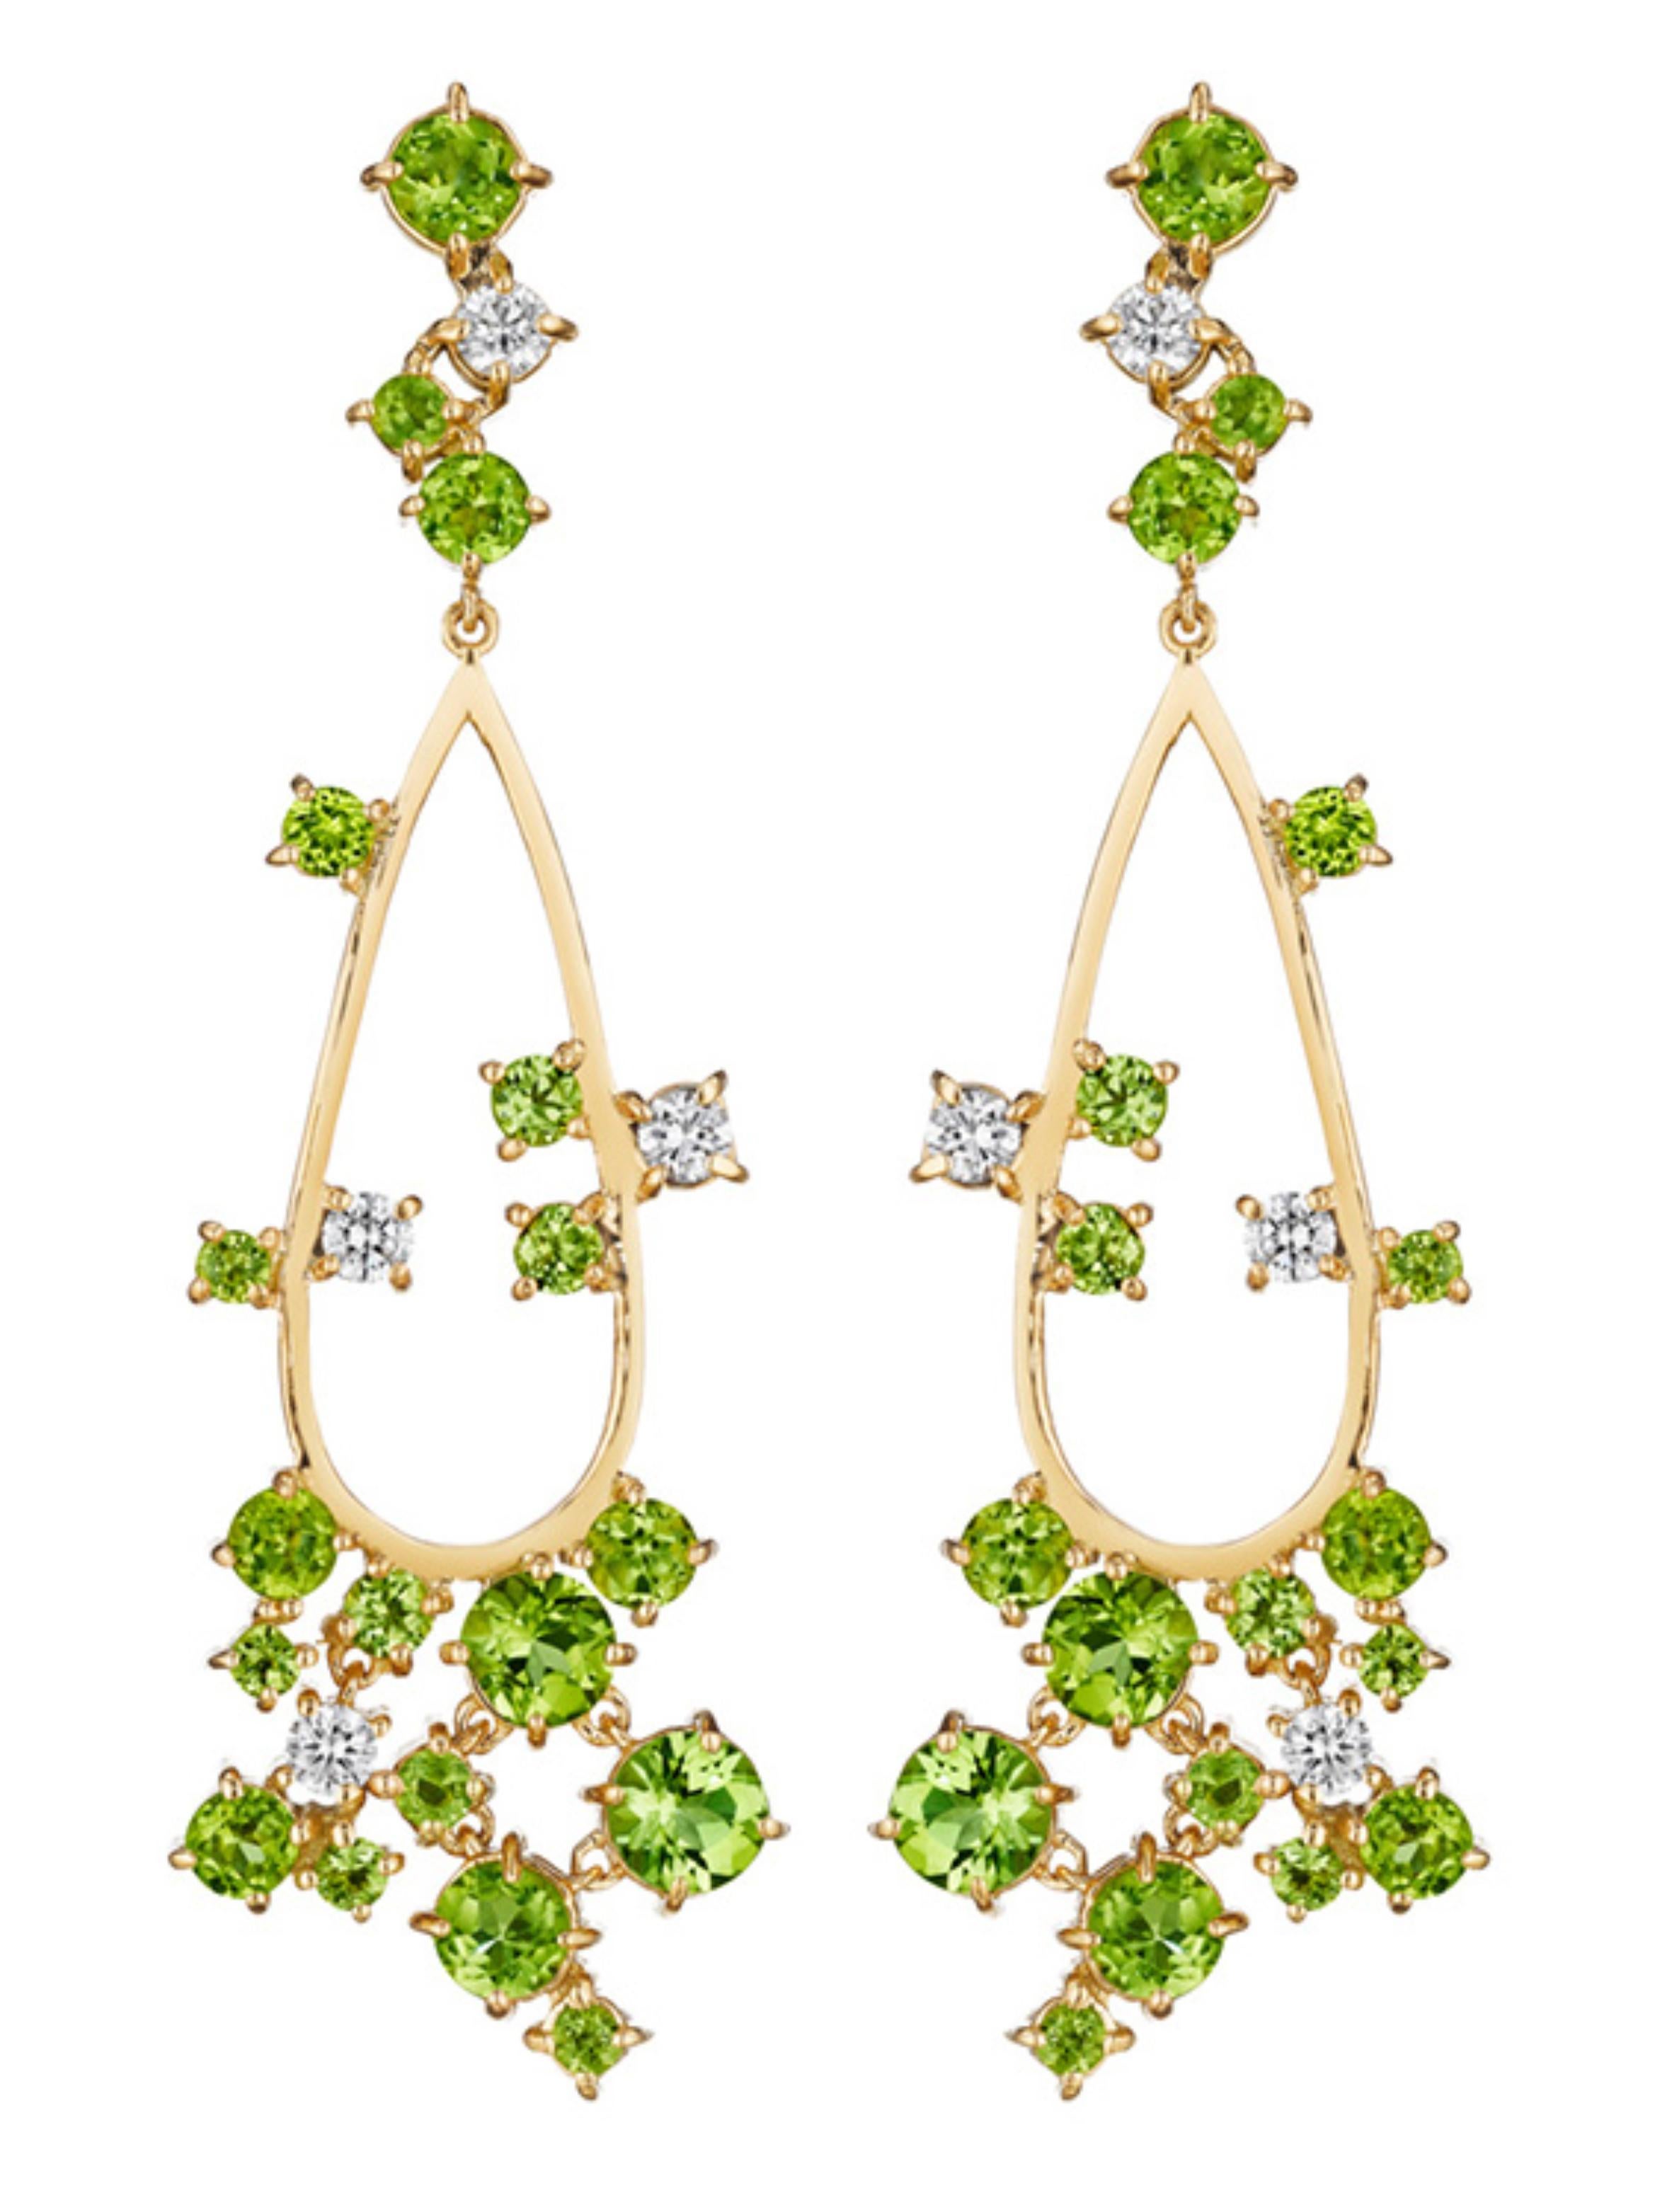 Brilliant Cut Melting Ice 18k Yellow Gold Peridot and Diamond Earrings by MadStone For Sale